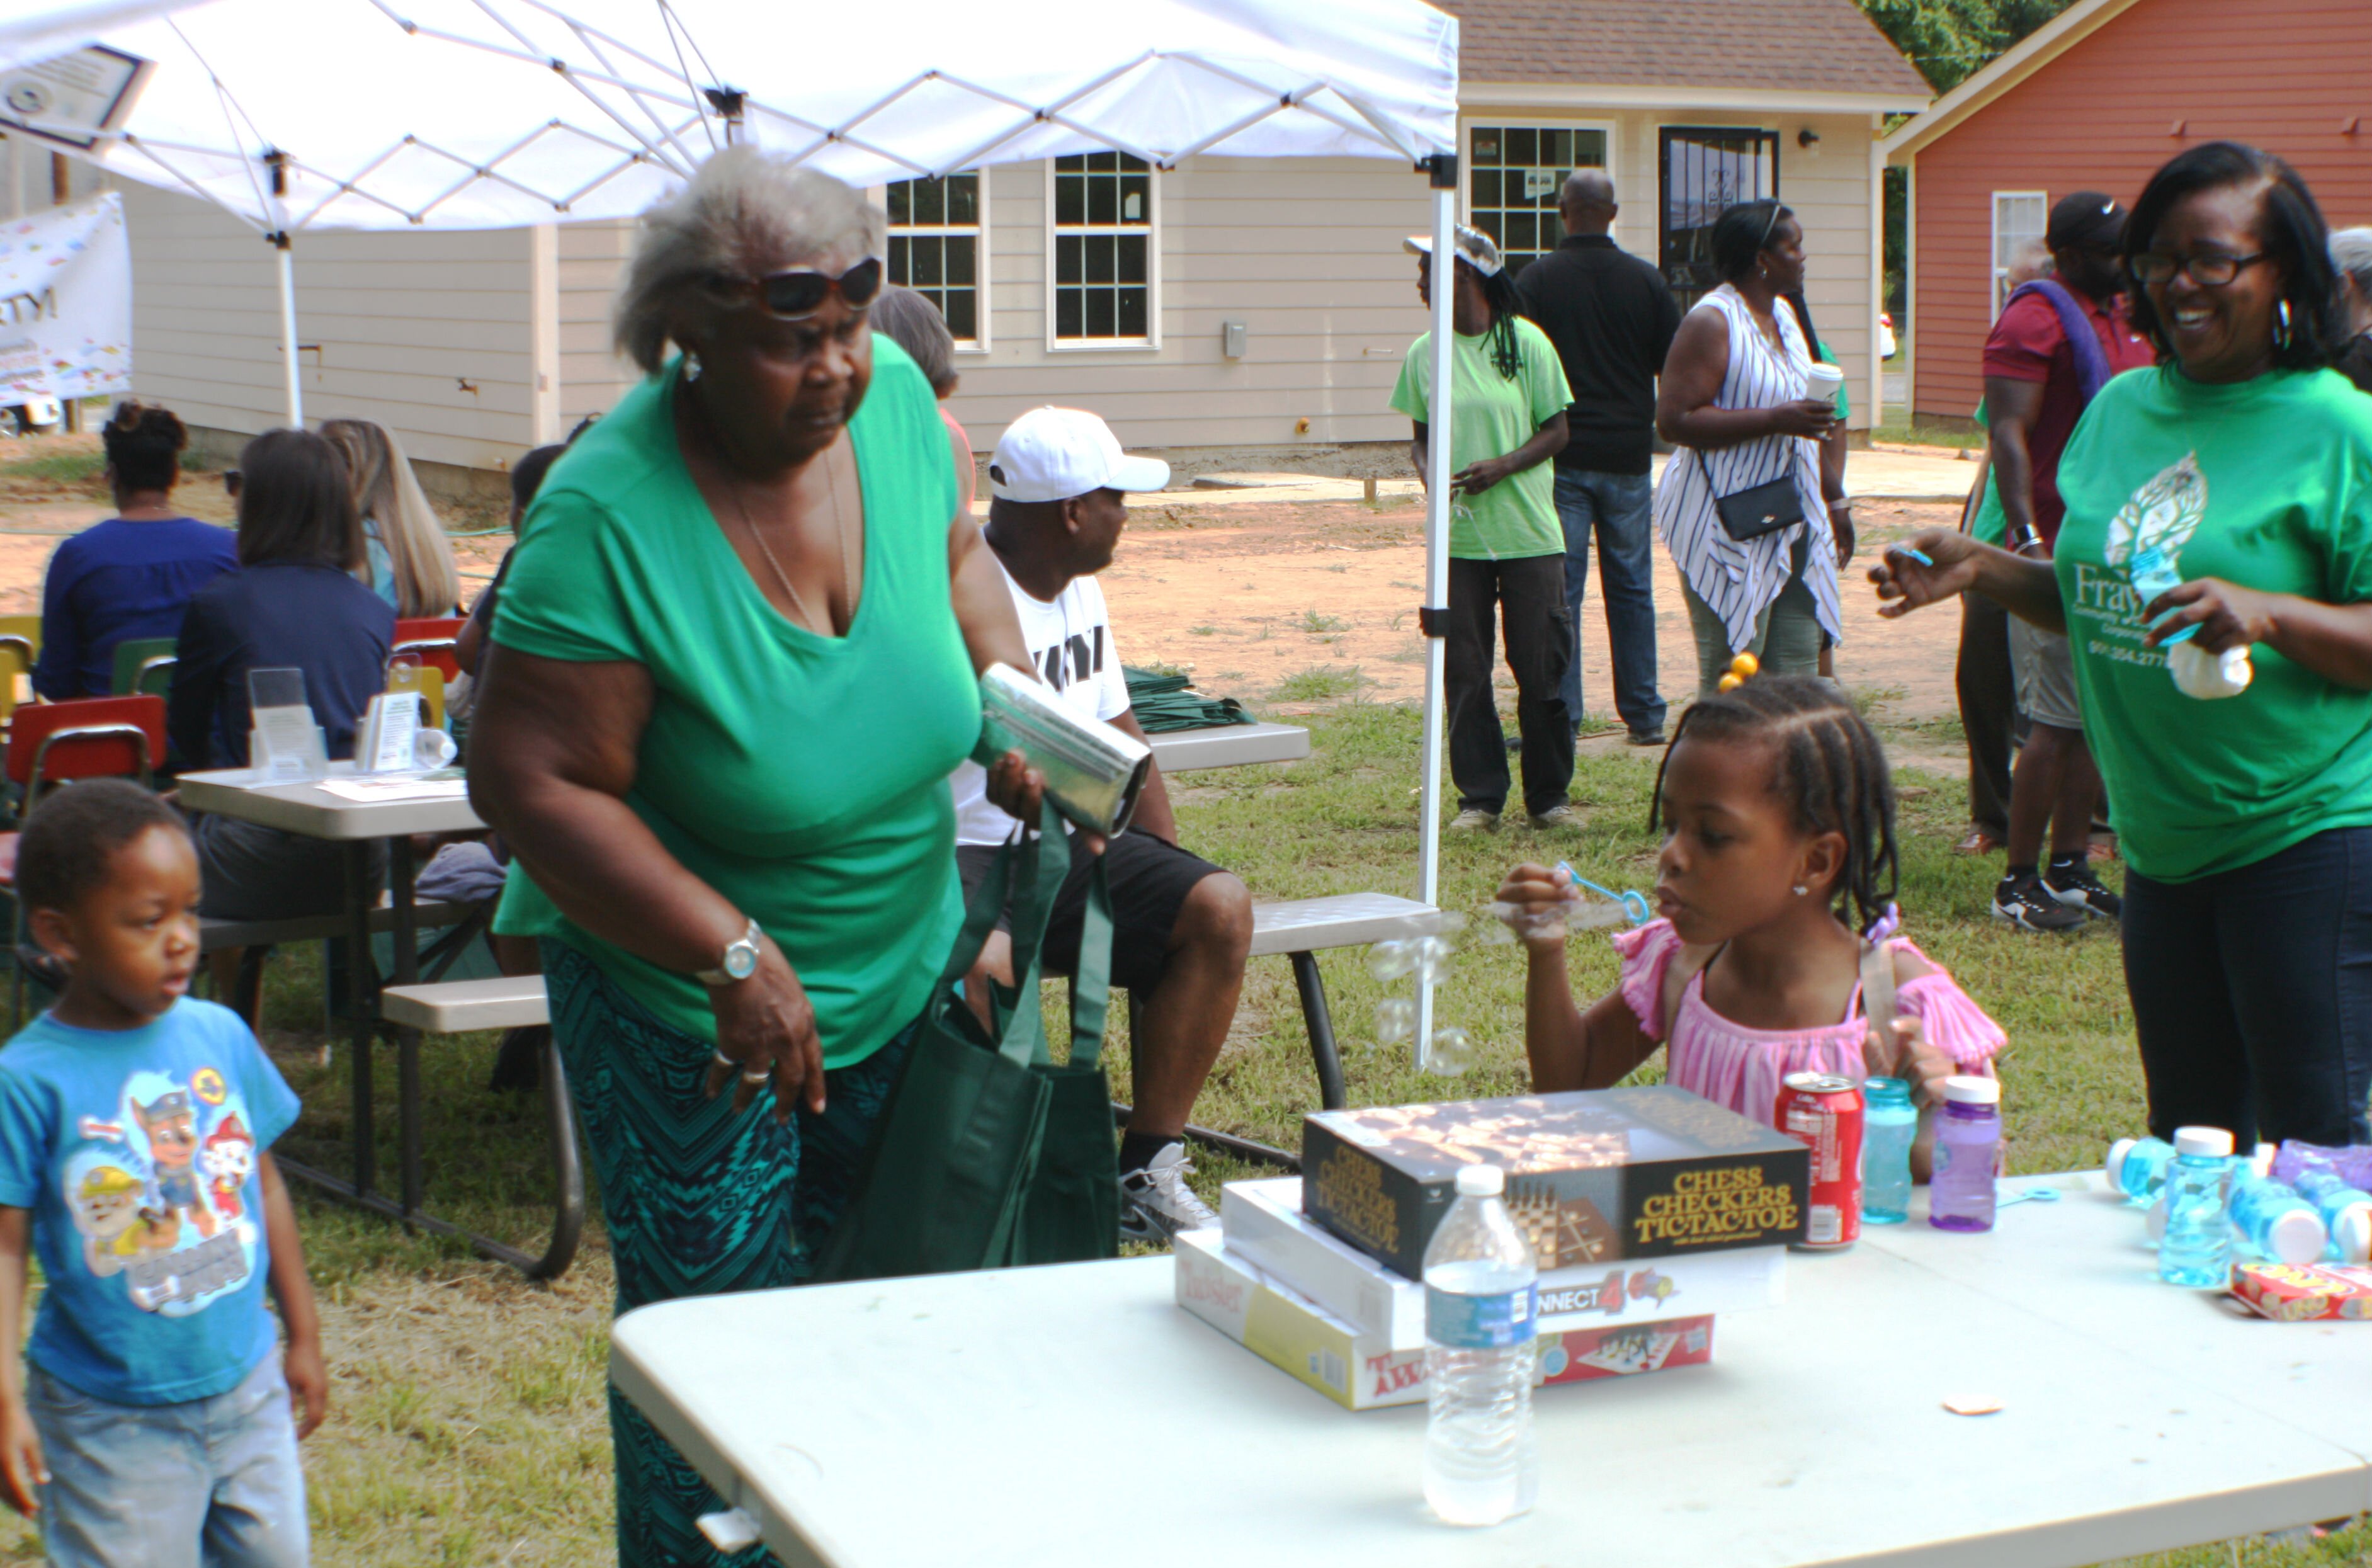 The youngest guests at the Frayser CDC open house had plenty of bubbles and games to keep them busy while the adults celebrated the first new homes built by Frayser CDC in 10 years. (Cole Bradley)